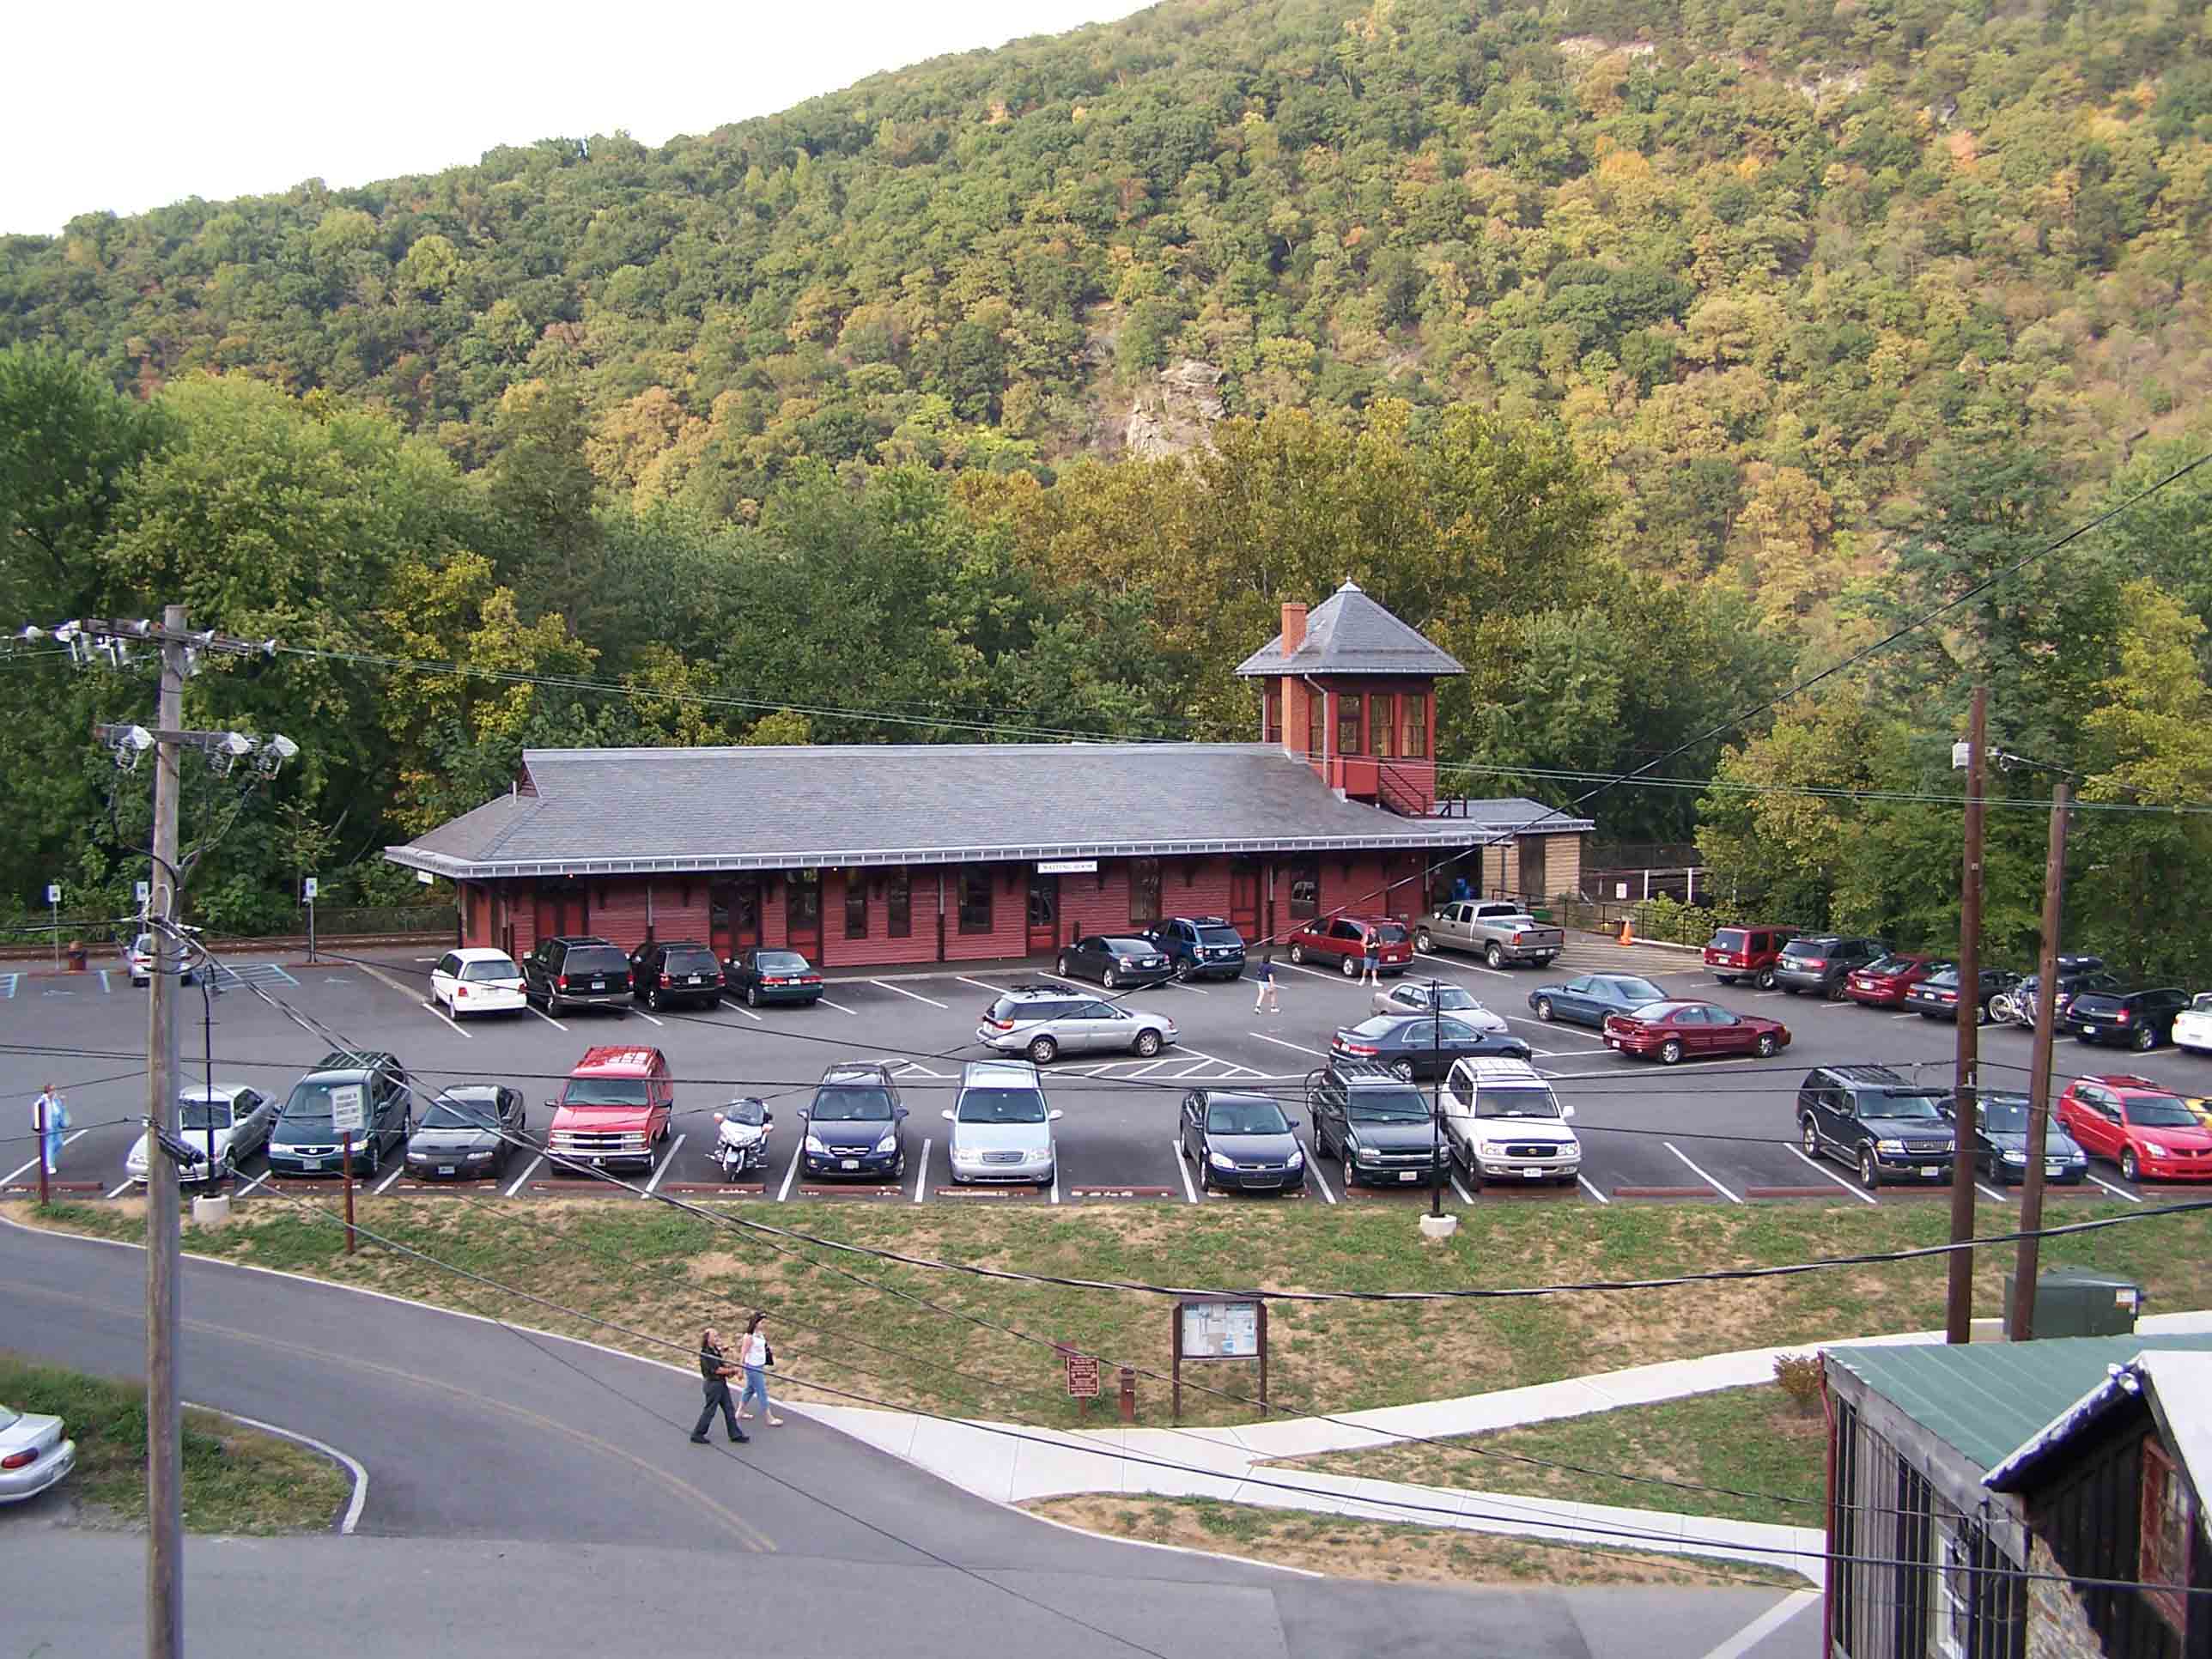 Amtrak station in Harpers Ferry. Courtesy at@rohland.org